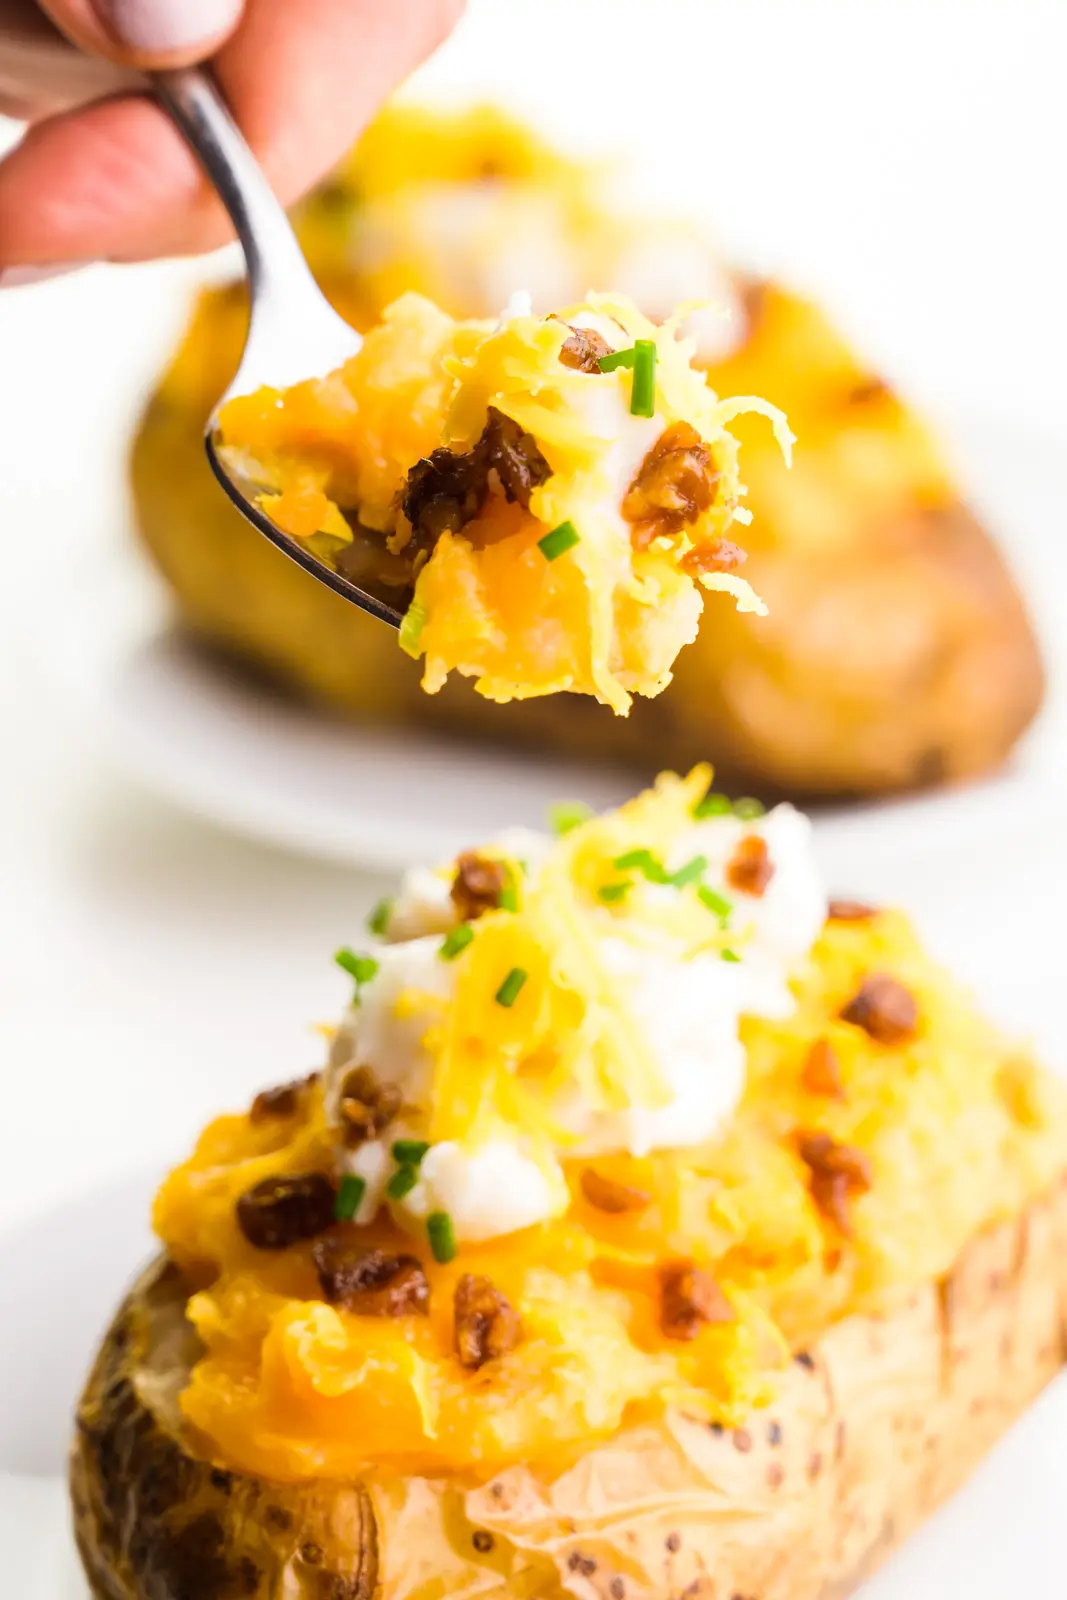 A hand holds a spoon full of potato filling, from vegan twice baked potatoes sitting on a plate behind it.